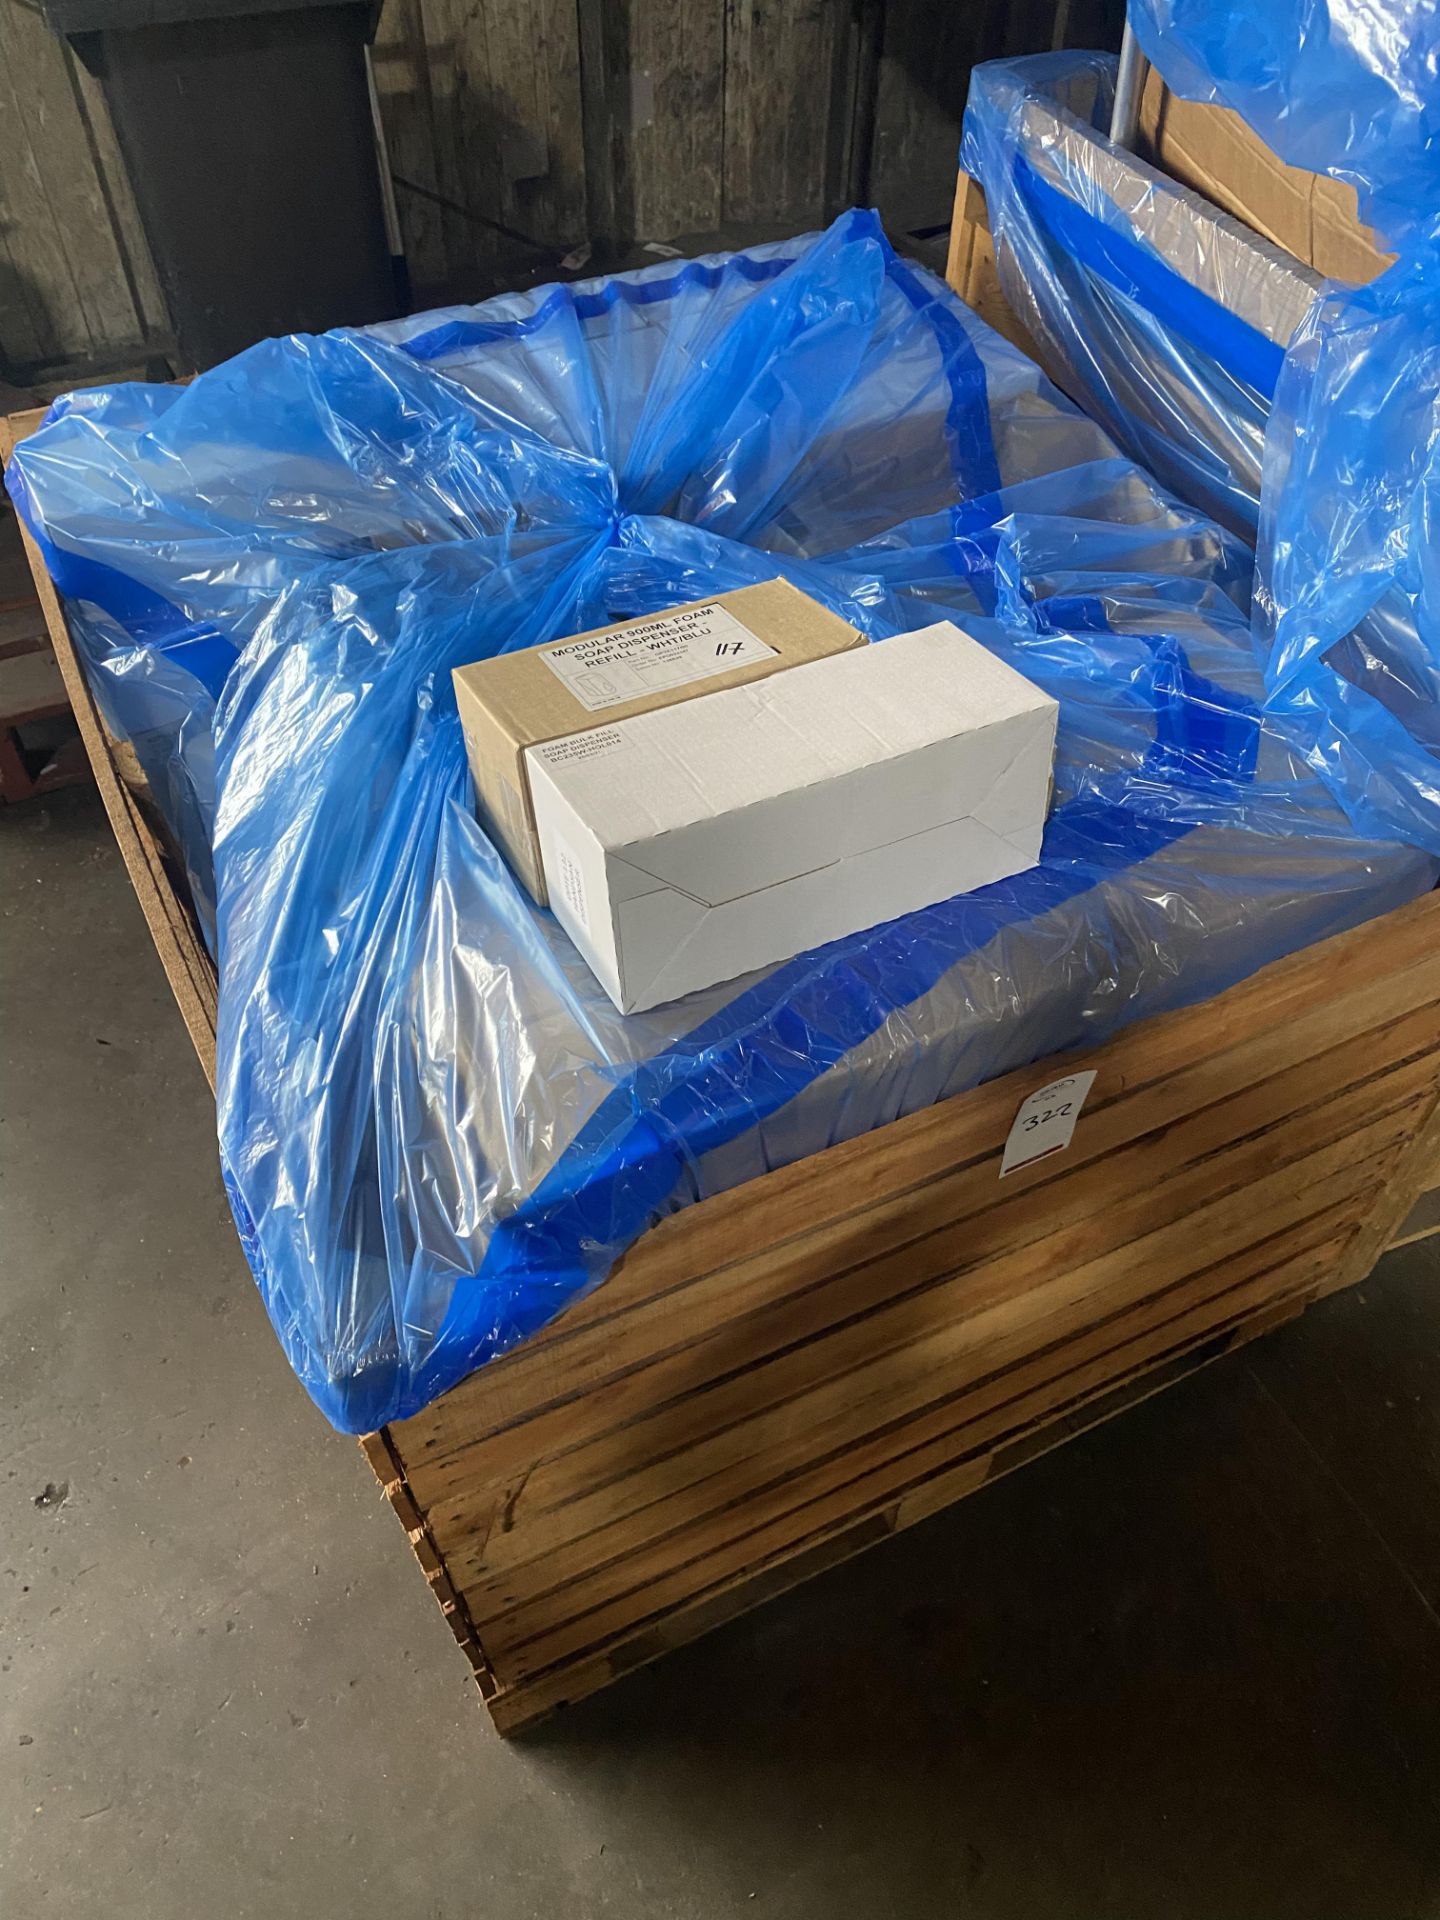 Contents of pallet to include large quantity of boxed soap dispensers (warehouse)